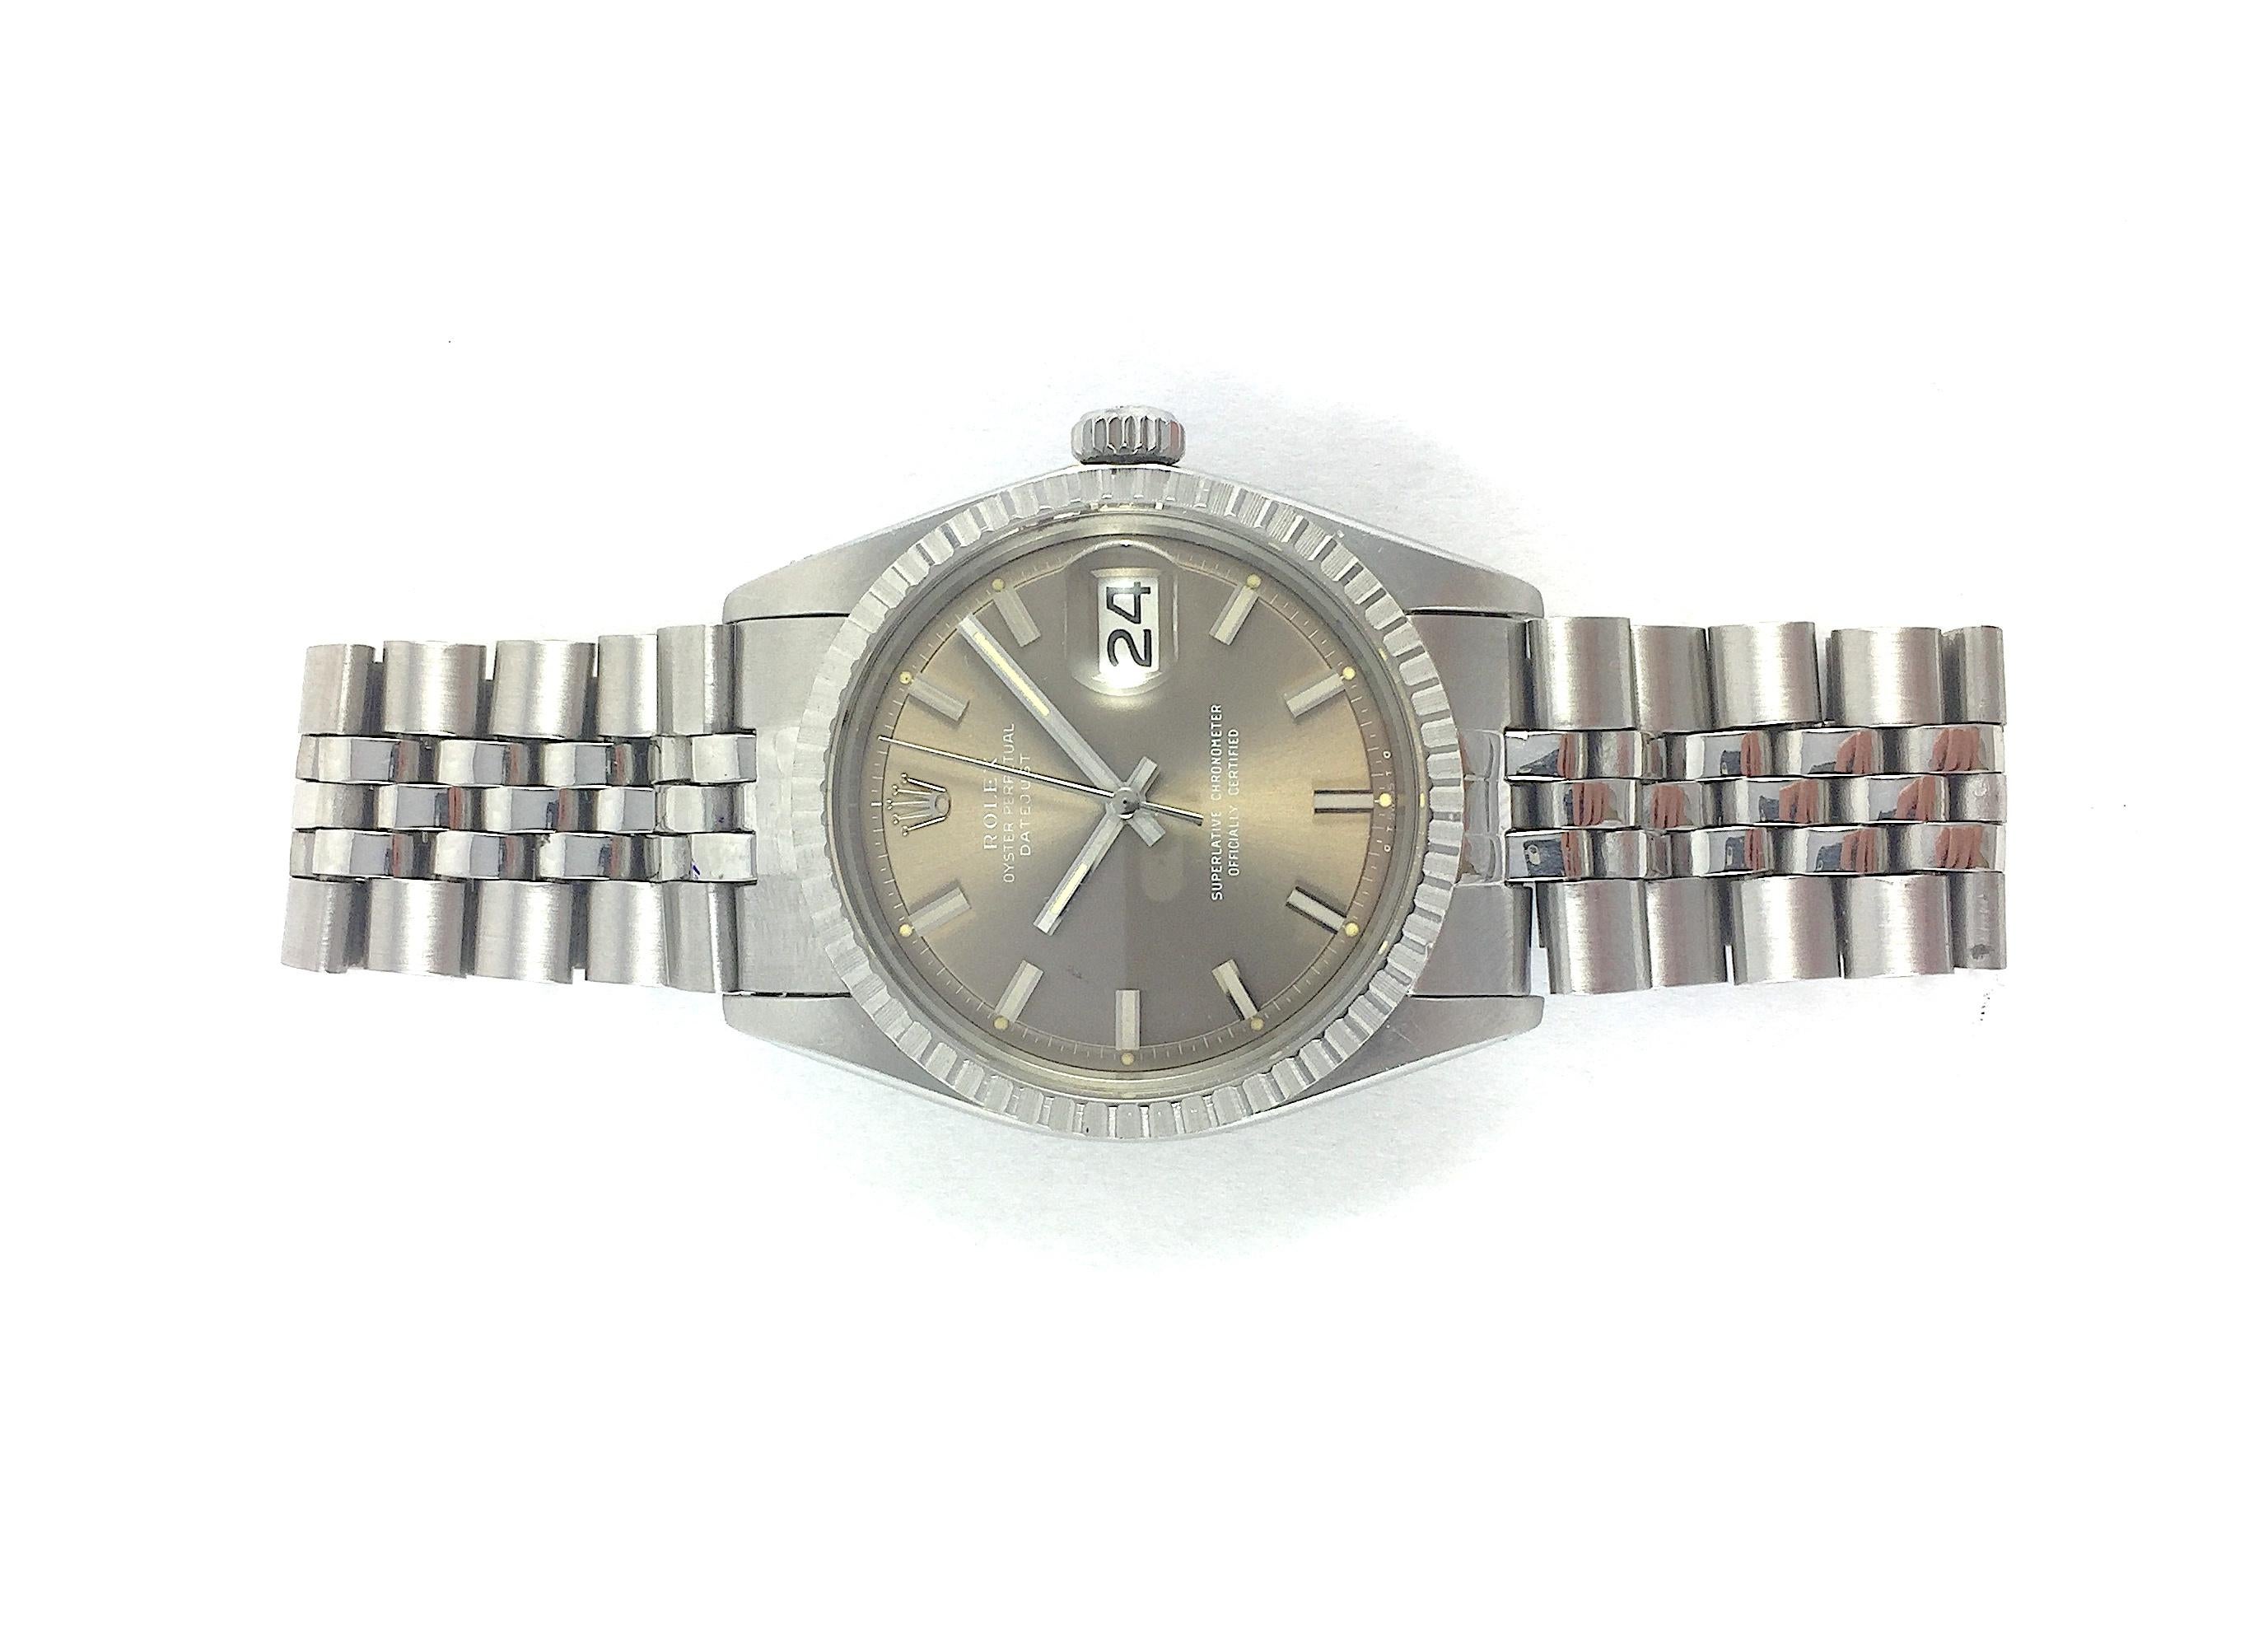 Rolex Stainless Steel and White Gold Oyster Perpetual Datejust Watch
Factory Rare Grey Wide-Boy Dial with Matching Wide-Boy Hands
Stainless Steel Engine-Turned Bezel
Stainless Steel Case
36mm in size 
Features Rolex Automatic Movement with Calibre